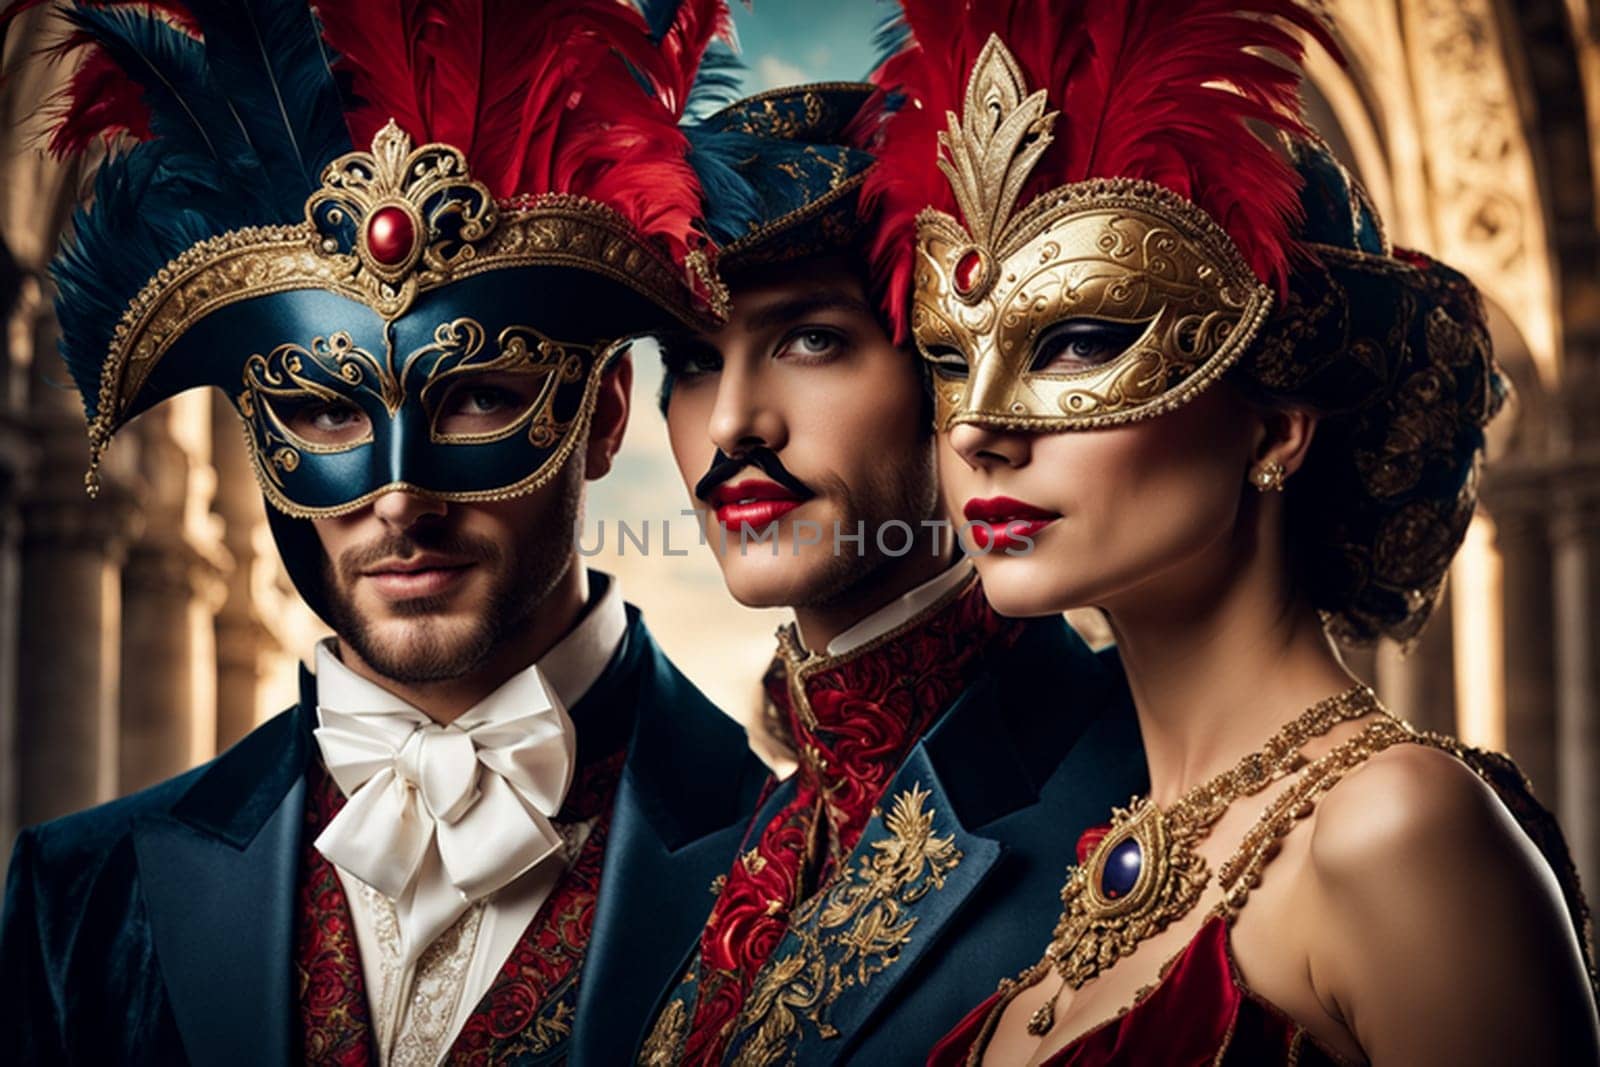 Ai generated portrait of people dressed with costumes and mask for the annual Venetian carnival.